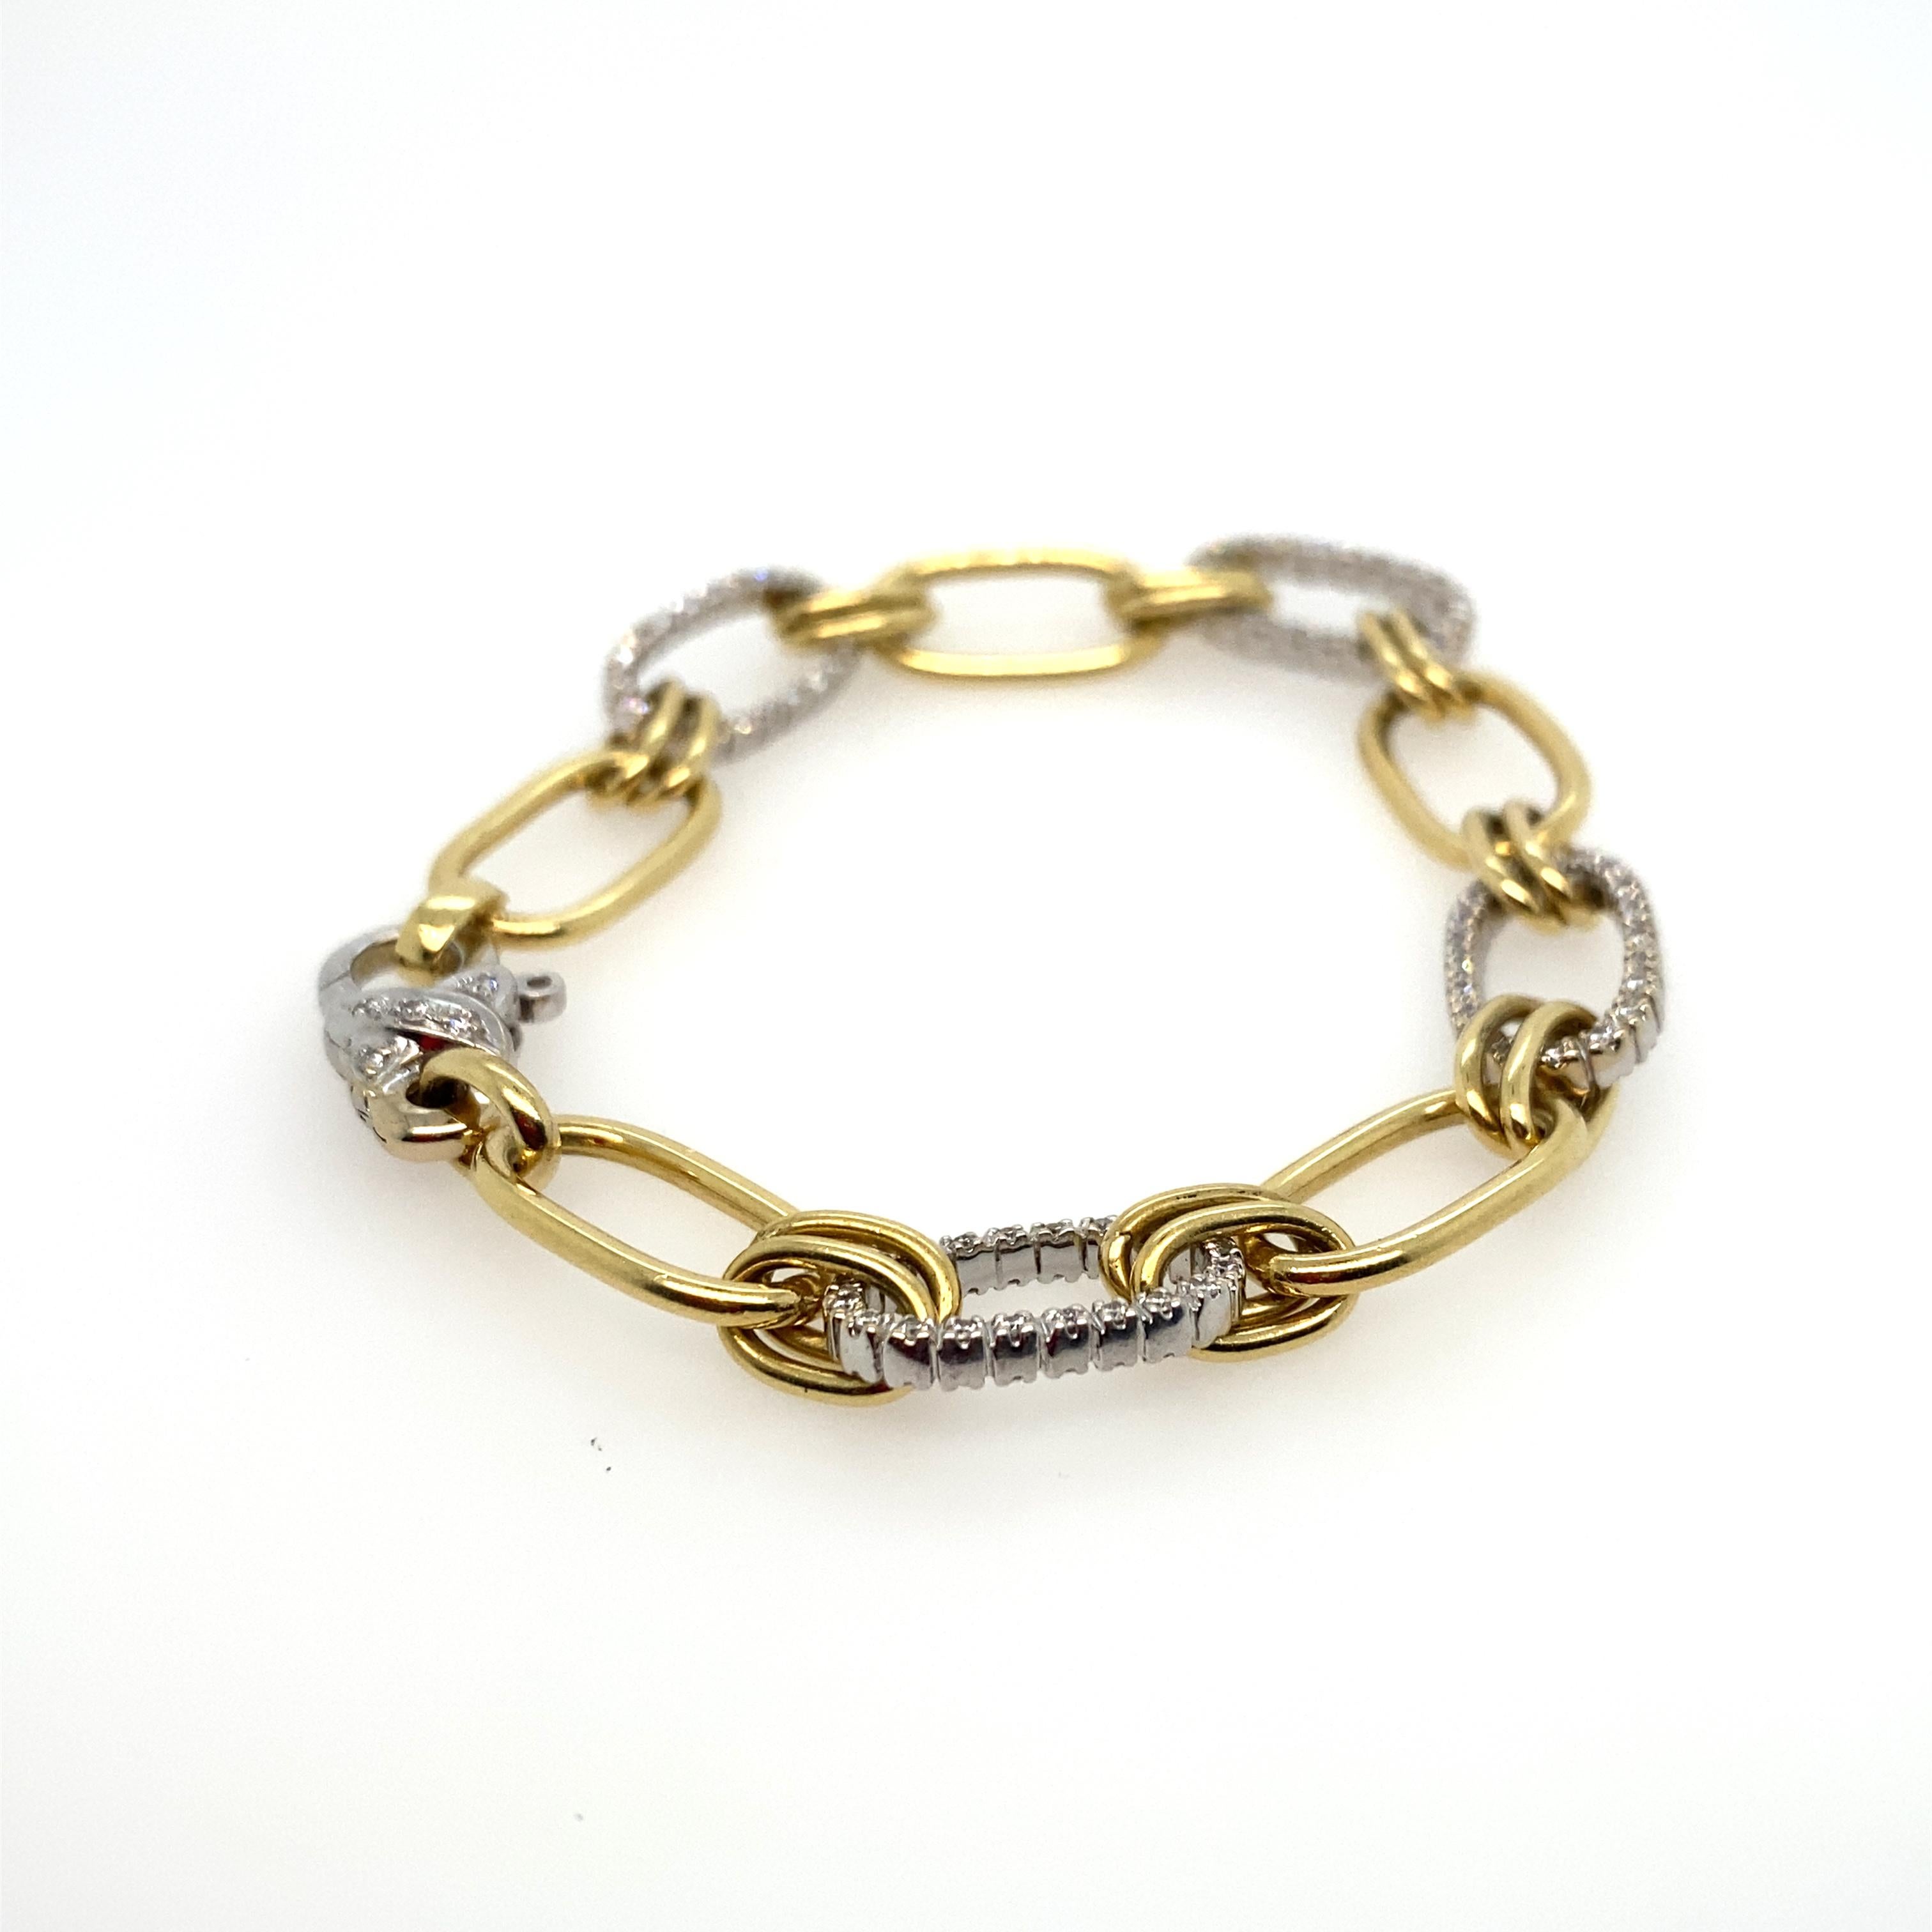 Fabulous Asprey and Guldag made 18kt two-tone diamond link bracelet.  This stunning link goes with just about everything!  Can be worn with yellow or white gold jewelry.  Links are a  classic look that never go out of style.  What also makes this so